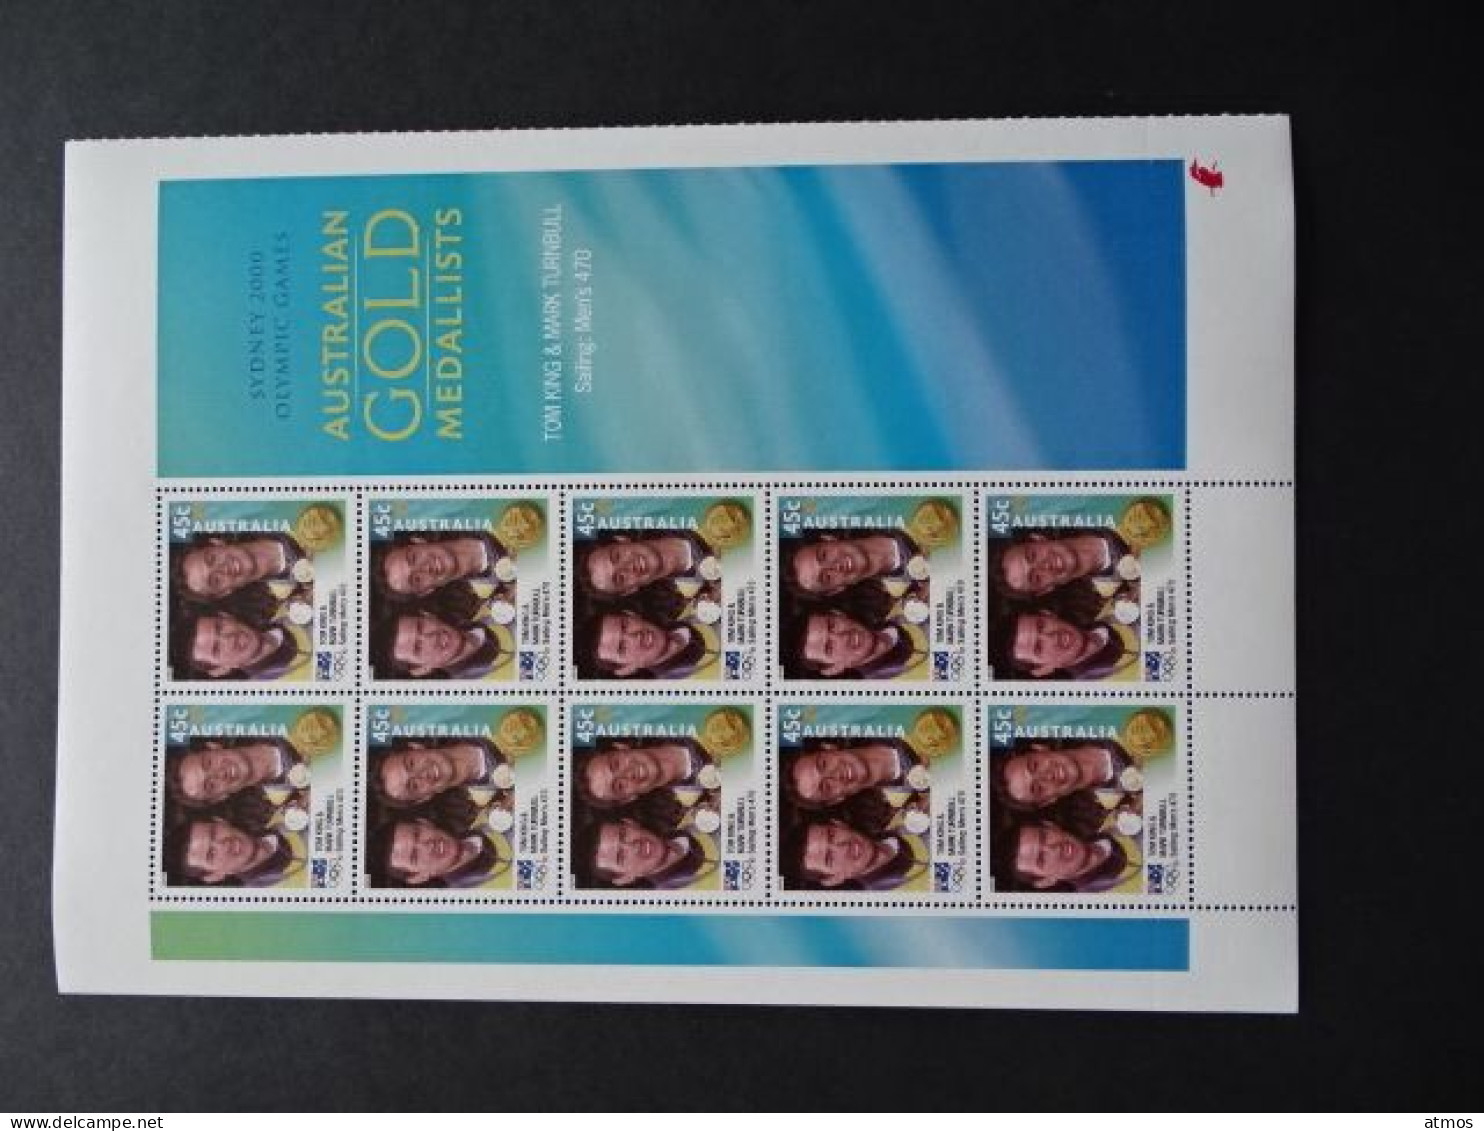 Australia MNH Michel Nr 1988 Sheet Of 10 From 2000 ACT - Nuevos